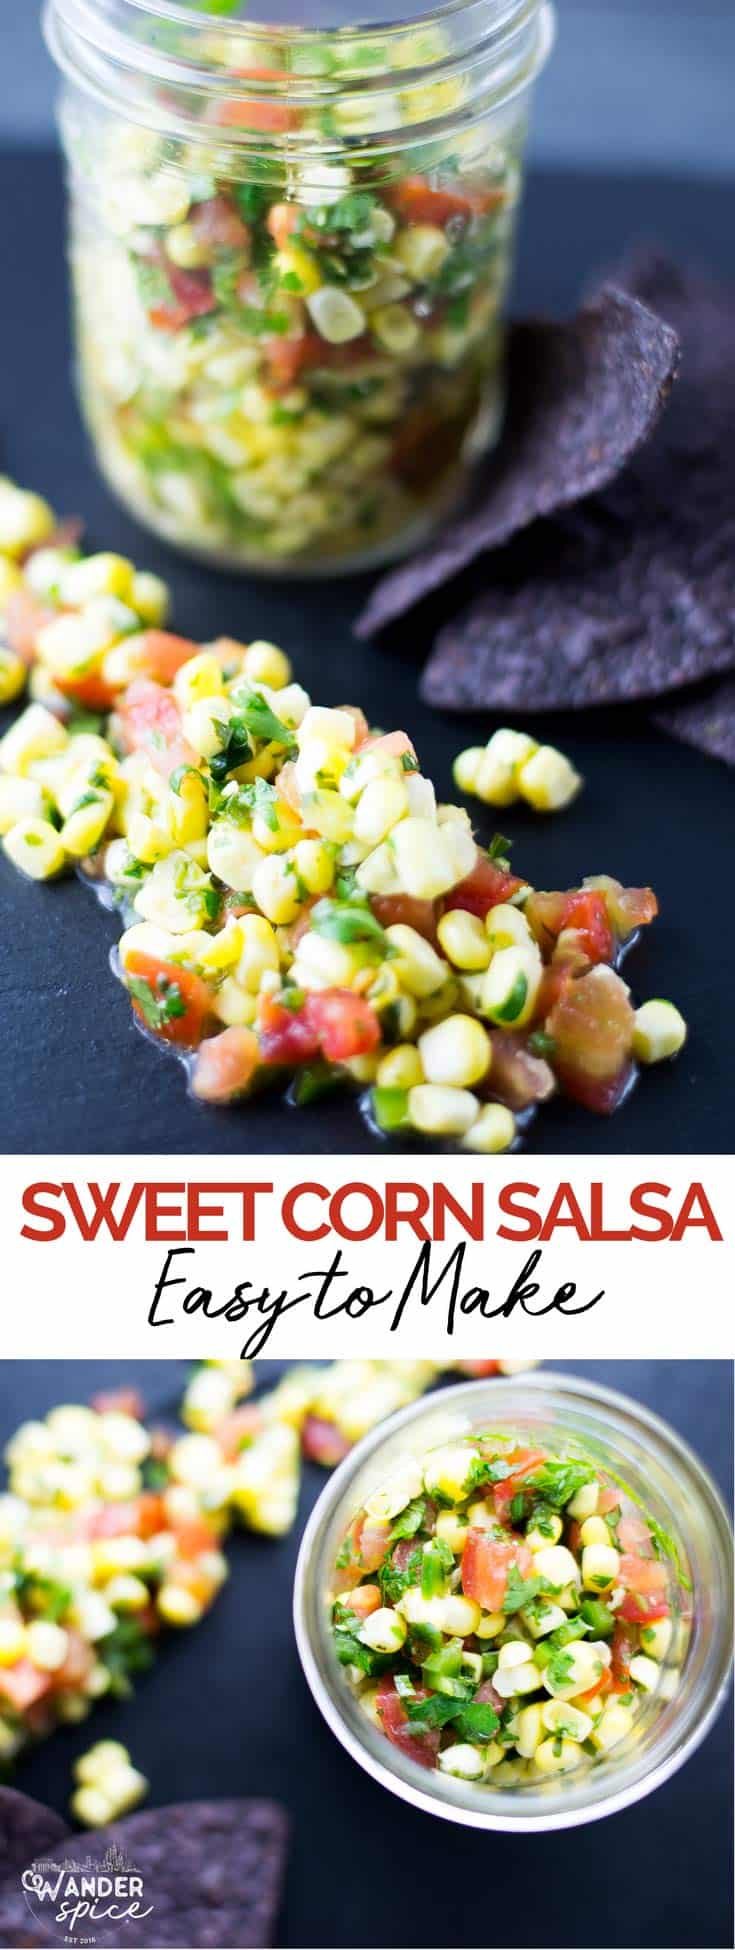 Easy Corn Salsa recipe fresh with tomatoes, cilantro, lime and jalapeño.